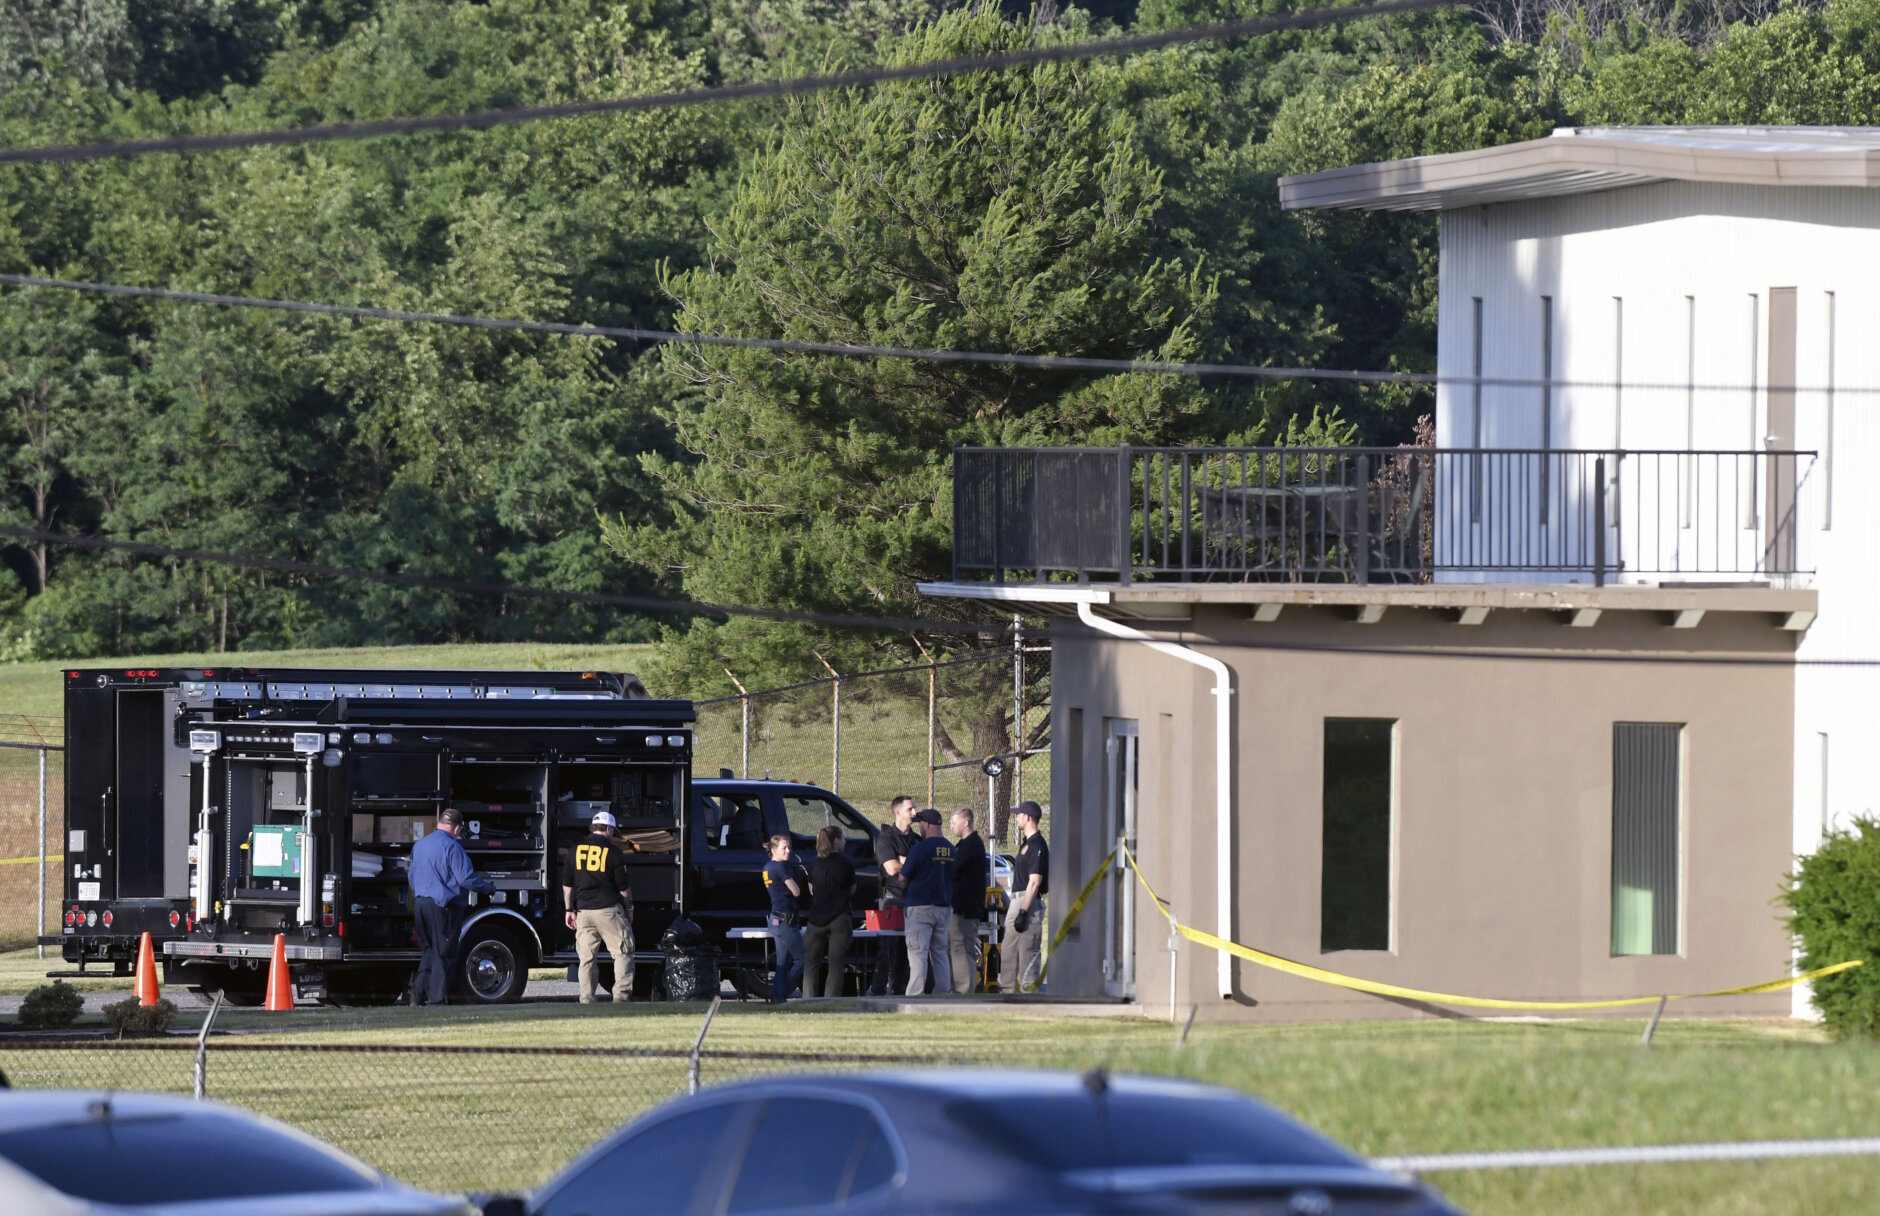 Law enforcement officers are working near where a man opened fire on a business, killing three people before the suspect and a police officer were injured in a shootout, authorities said in Smithsburg, Maryland, Thursday, June 9, 2022. The Washington County ( Md.) Sheriff's Office said in a press release that three victims were found dead at Columbia Machine Inc.  and a fourth victim was seriously injured.  (AP Photo/Steve Ruark)